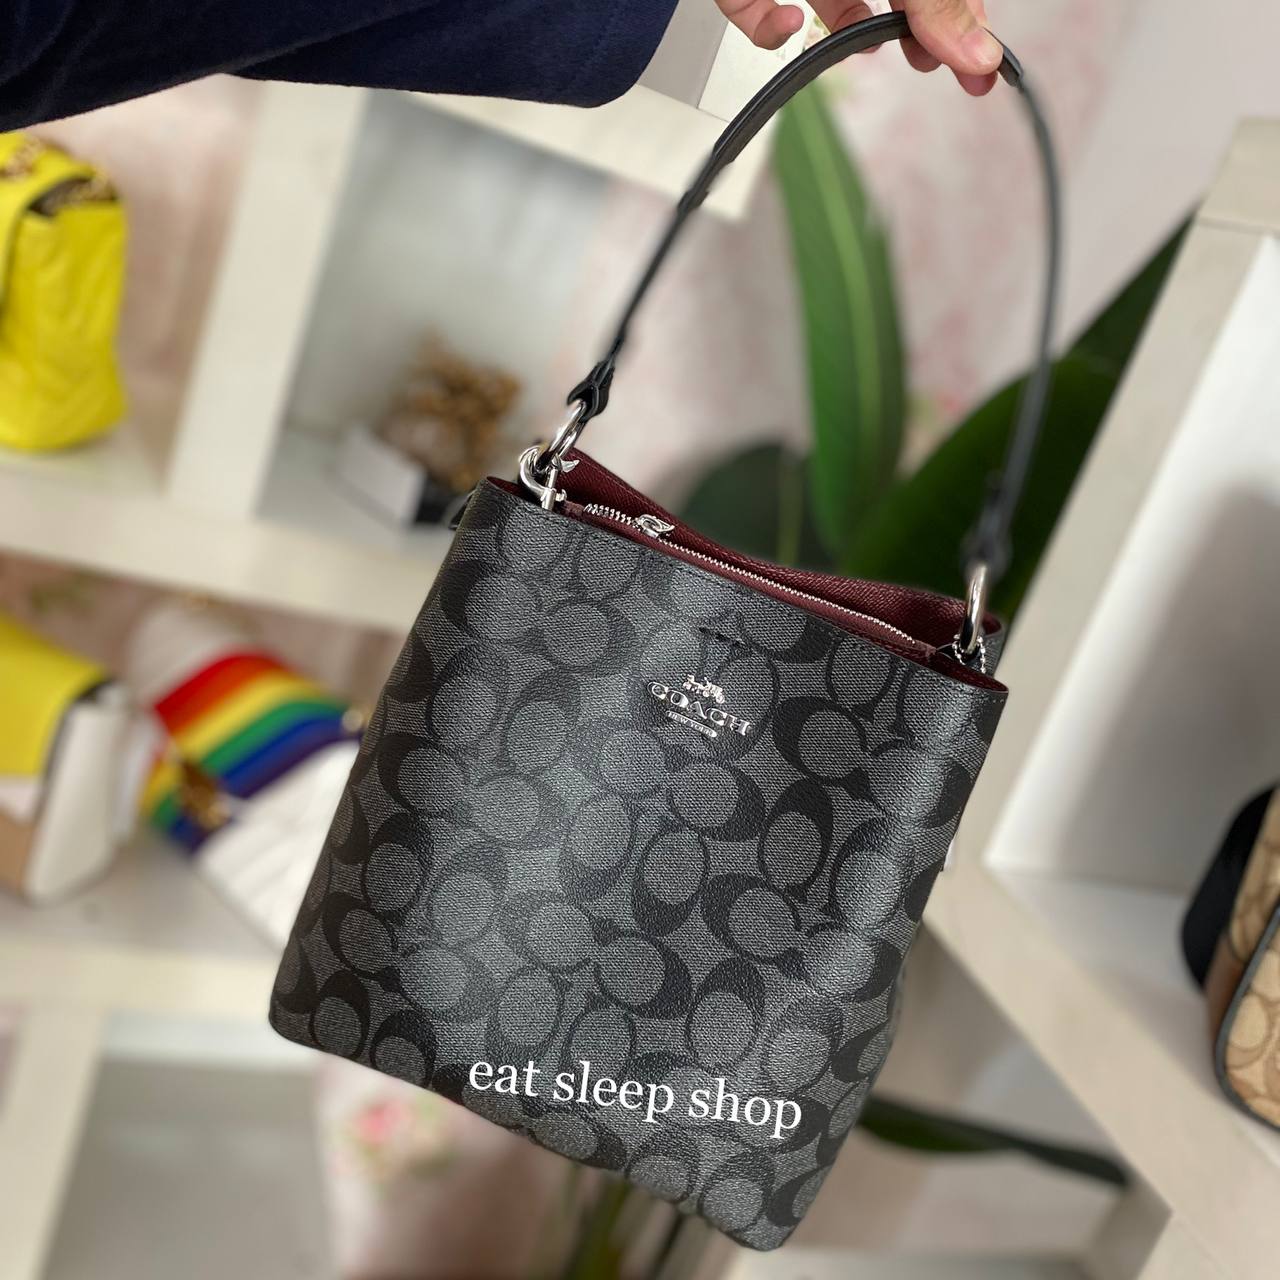 Coach Small Town Bucket Bag in Graphite/Wine/Black (2312) RM850 Signature  coated canvas and smooth leather Center zip compartment Snap closure  Handle, By Usaloveshoppe